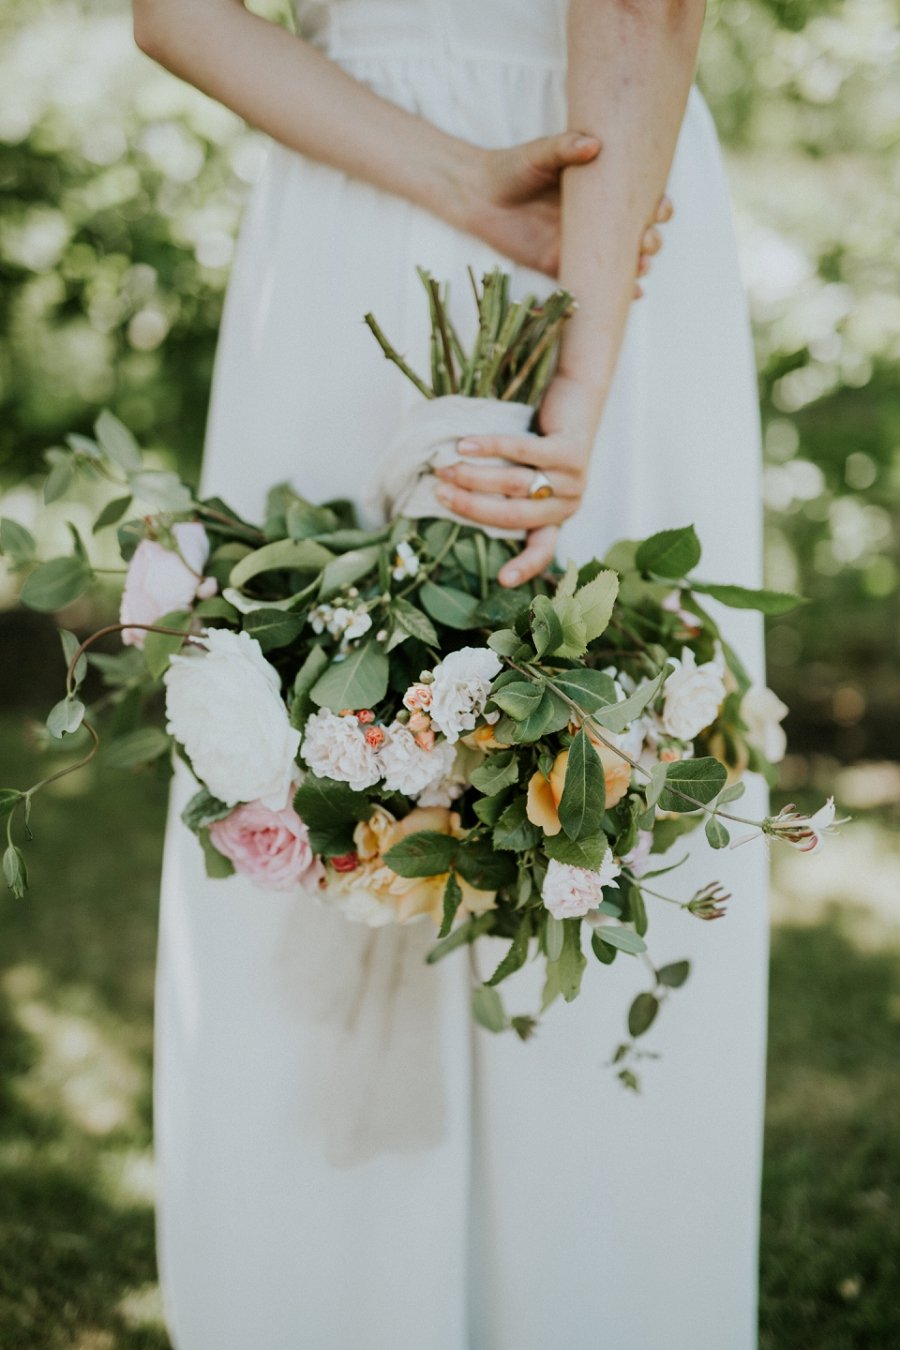 bride with bouquet of flowers | Get married abroad | Danish Island Weddings | Full service Denmark wedding planners